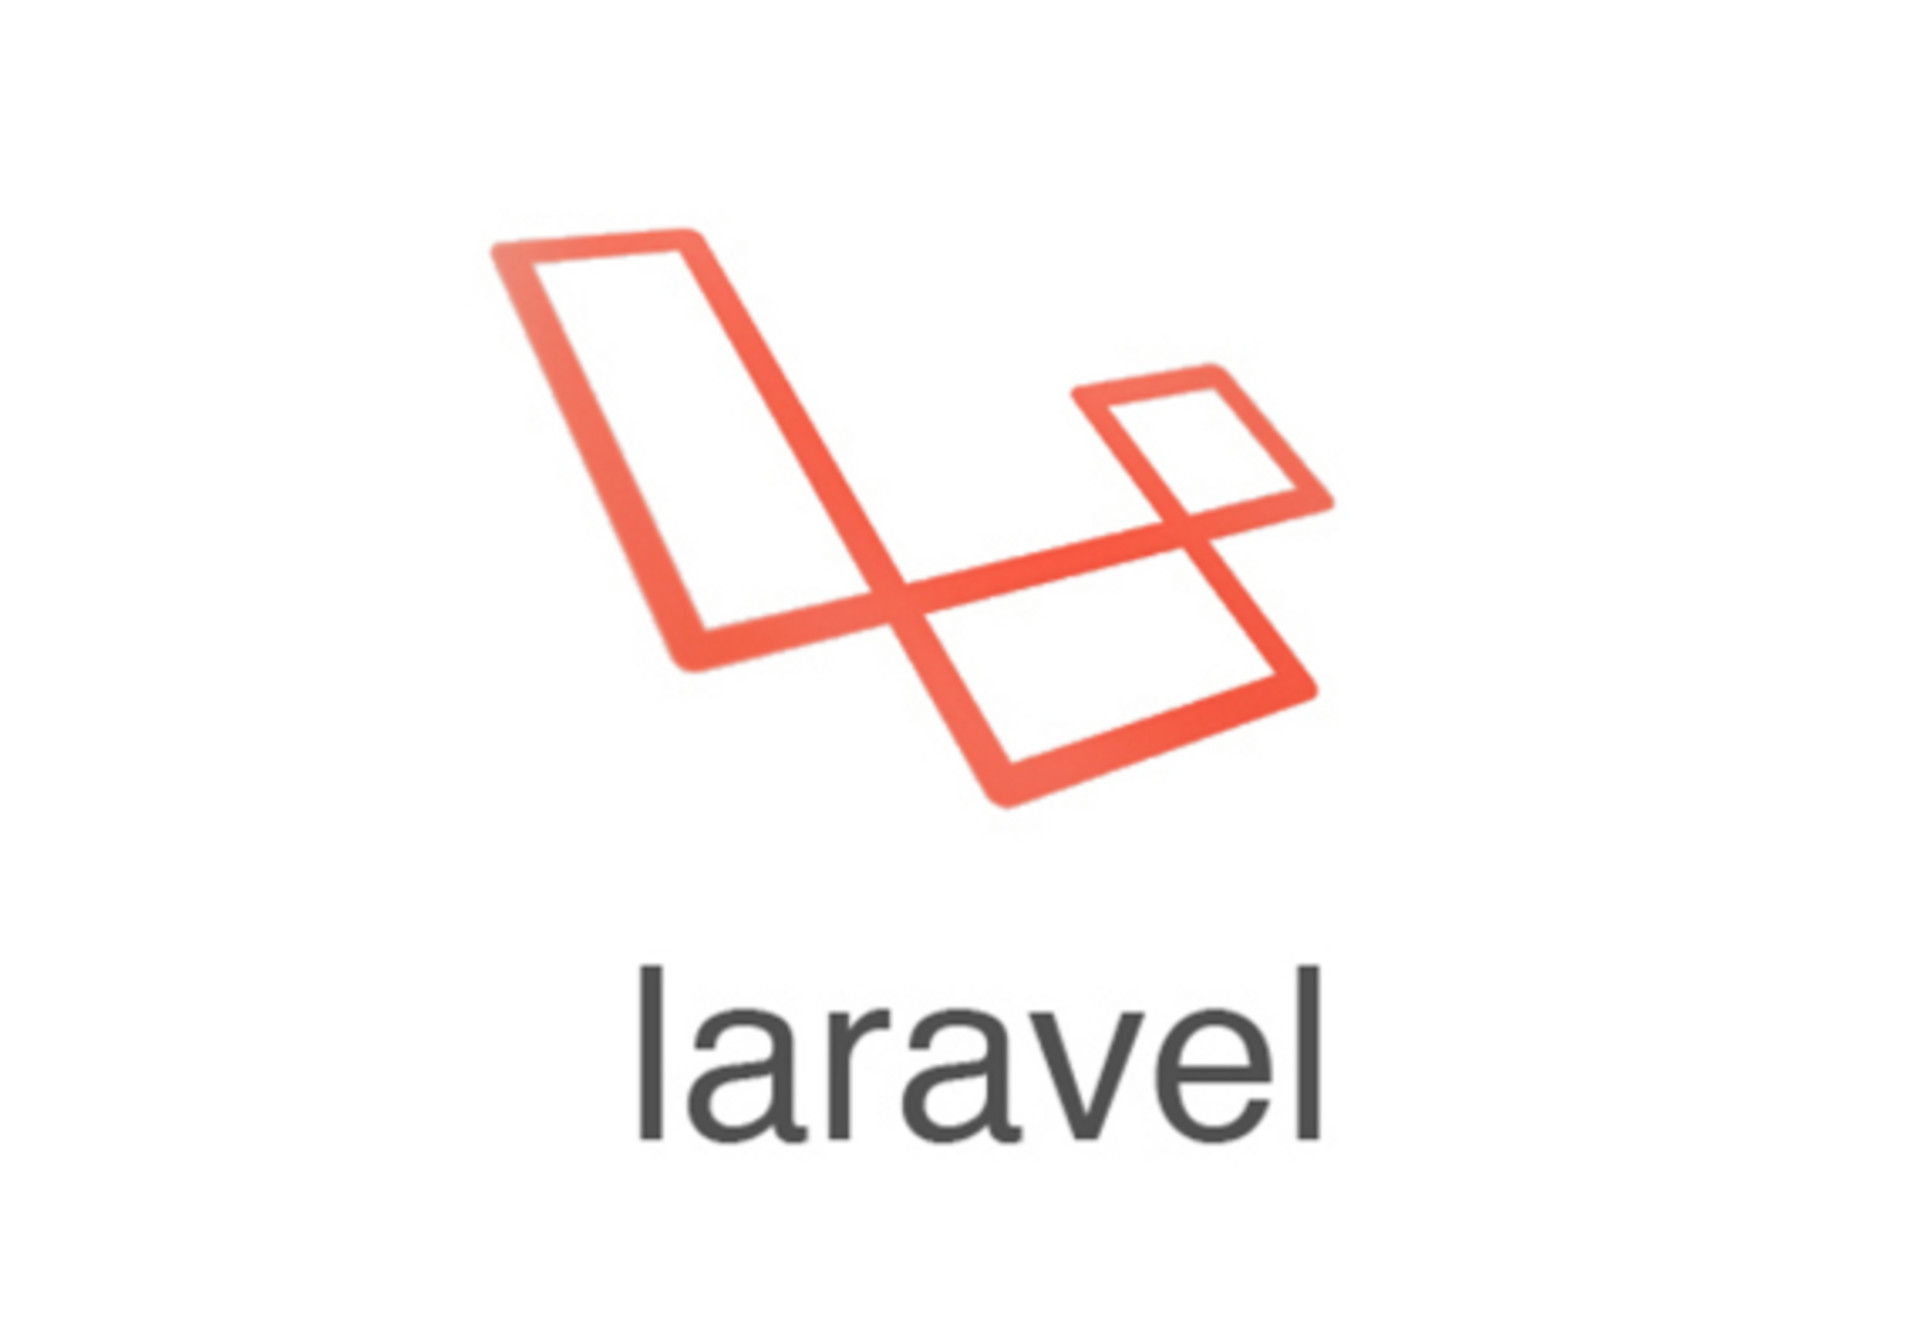 Step by step instruction of setting up real-time secure broadcasting with Laravel 5.1, socket.io and redis